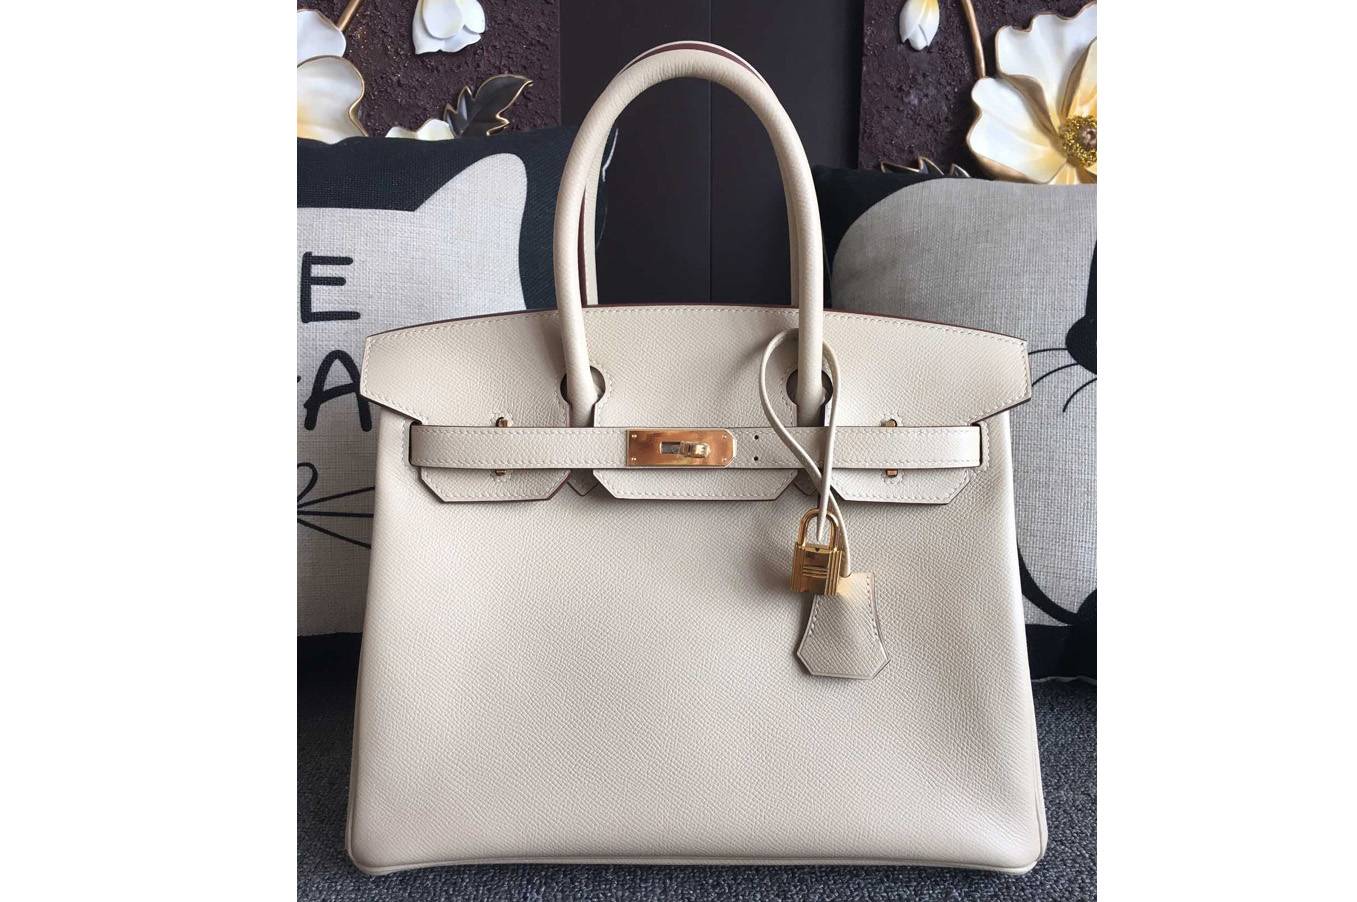 Hermes Birkin 30 Tote Bags Full Handstitched in White Epsom Leather With Gold Buckle